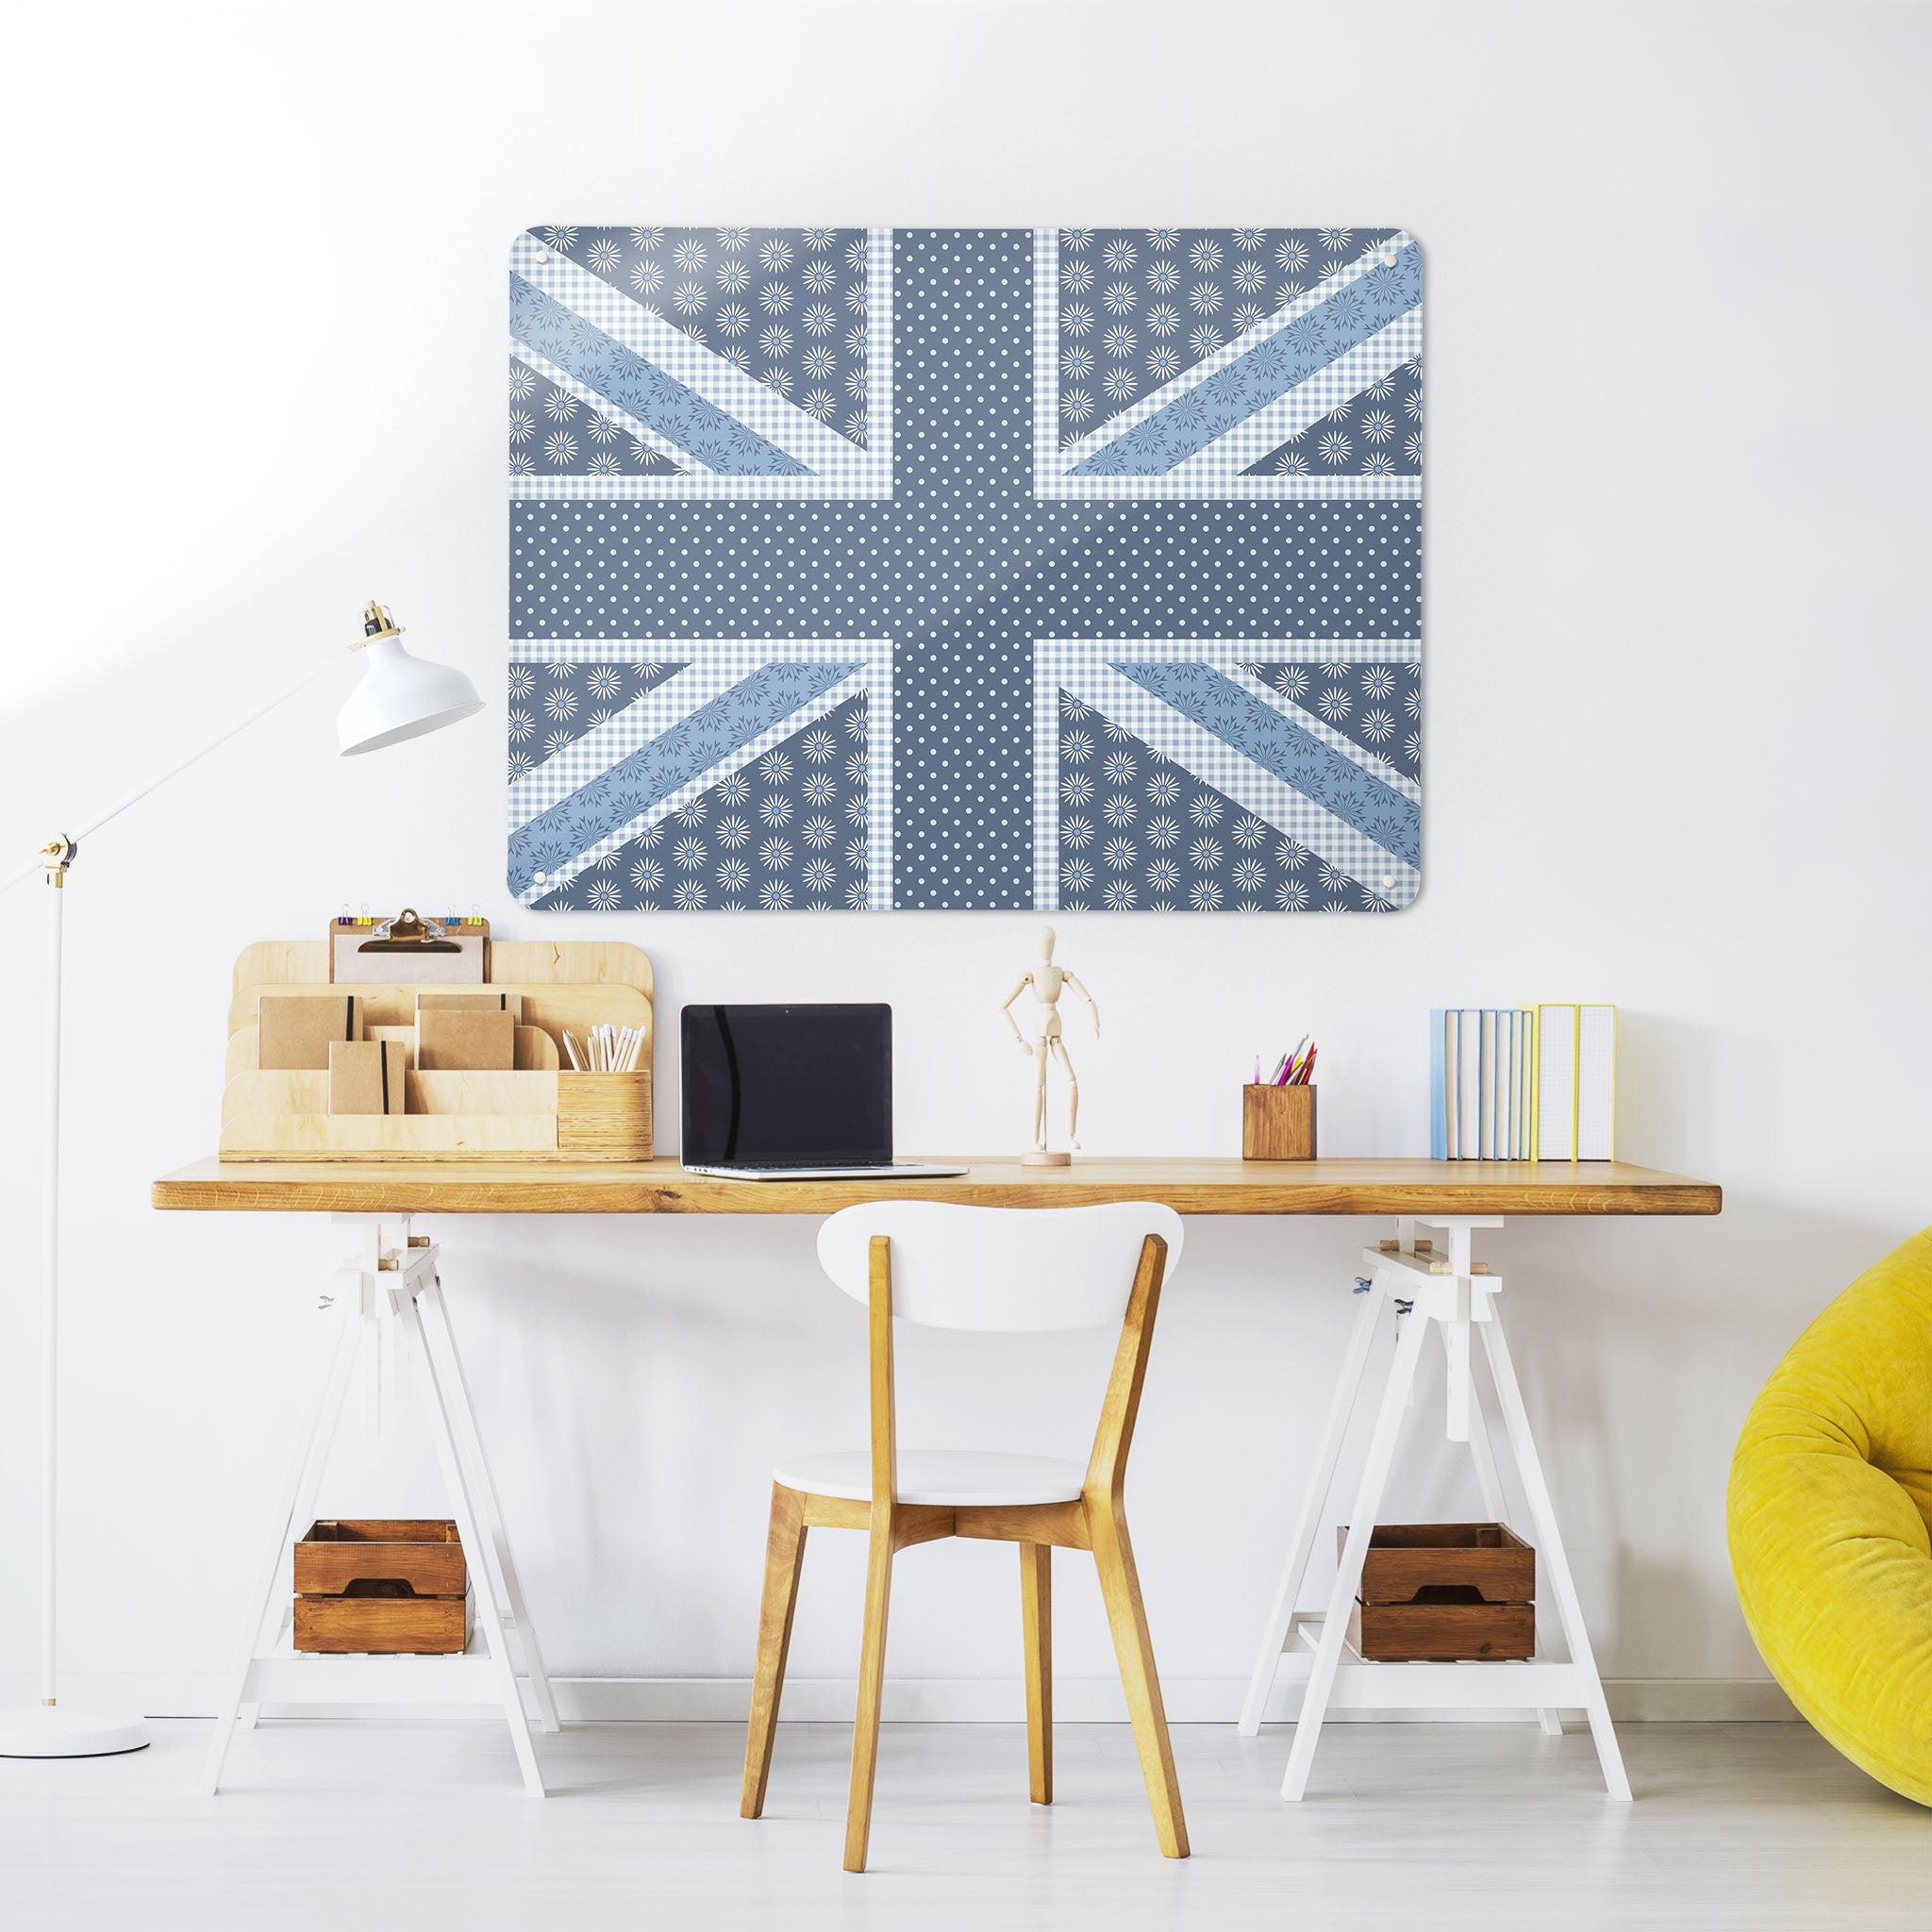 A desk in a workspace setting in a white interior with a magnetic metal wall art panel showing a Cool Britannia design in blue and white